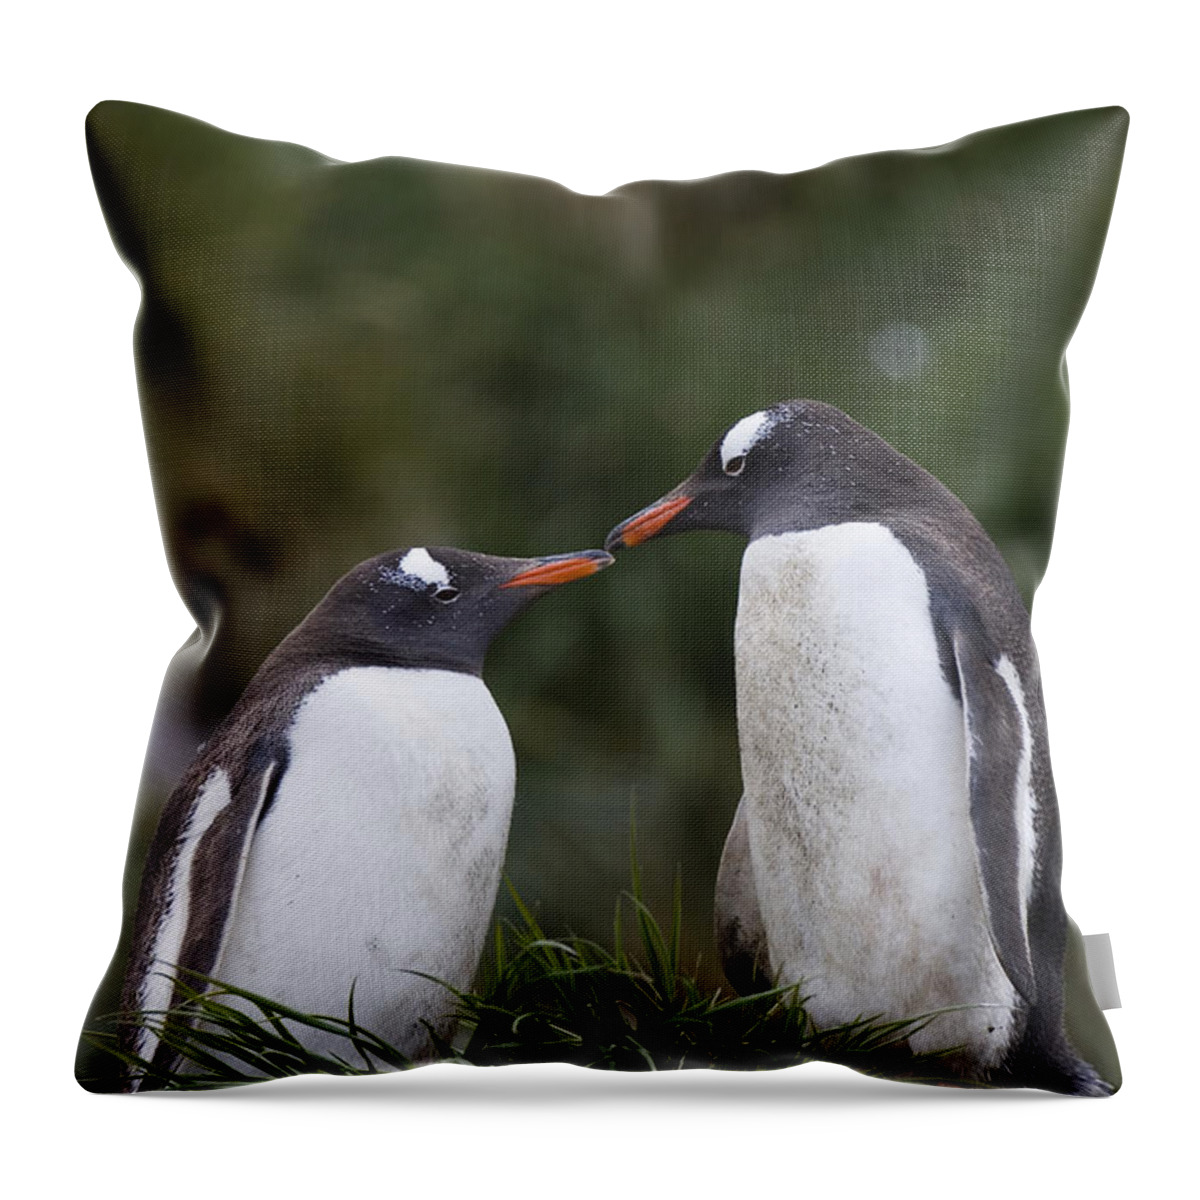 00761863 Throw Pillow featuring the photograph Gentoo Penguins Nesting In Gold Harbor by Suzi Eszterhas